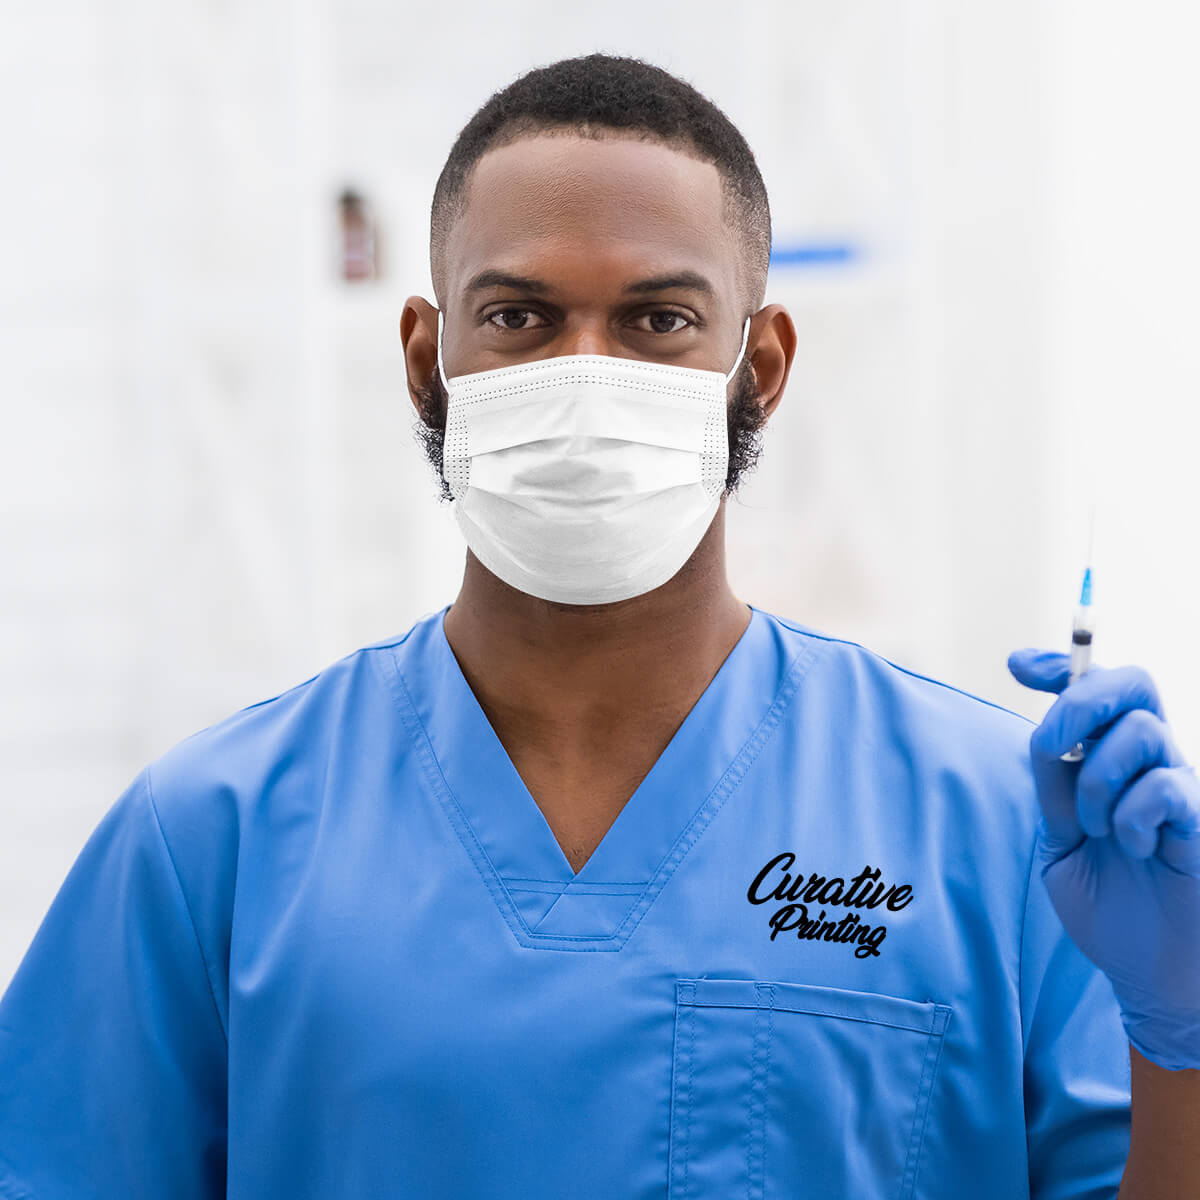 Male medical professional in blue custom branded scrub apparel promotional wellness & safety by curative printing